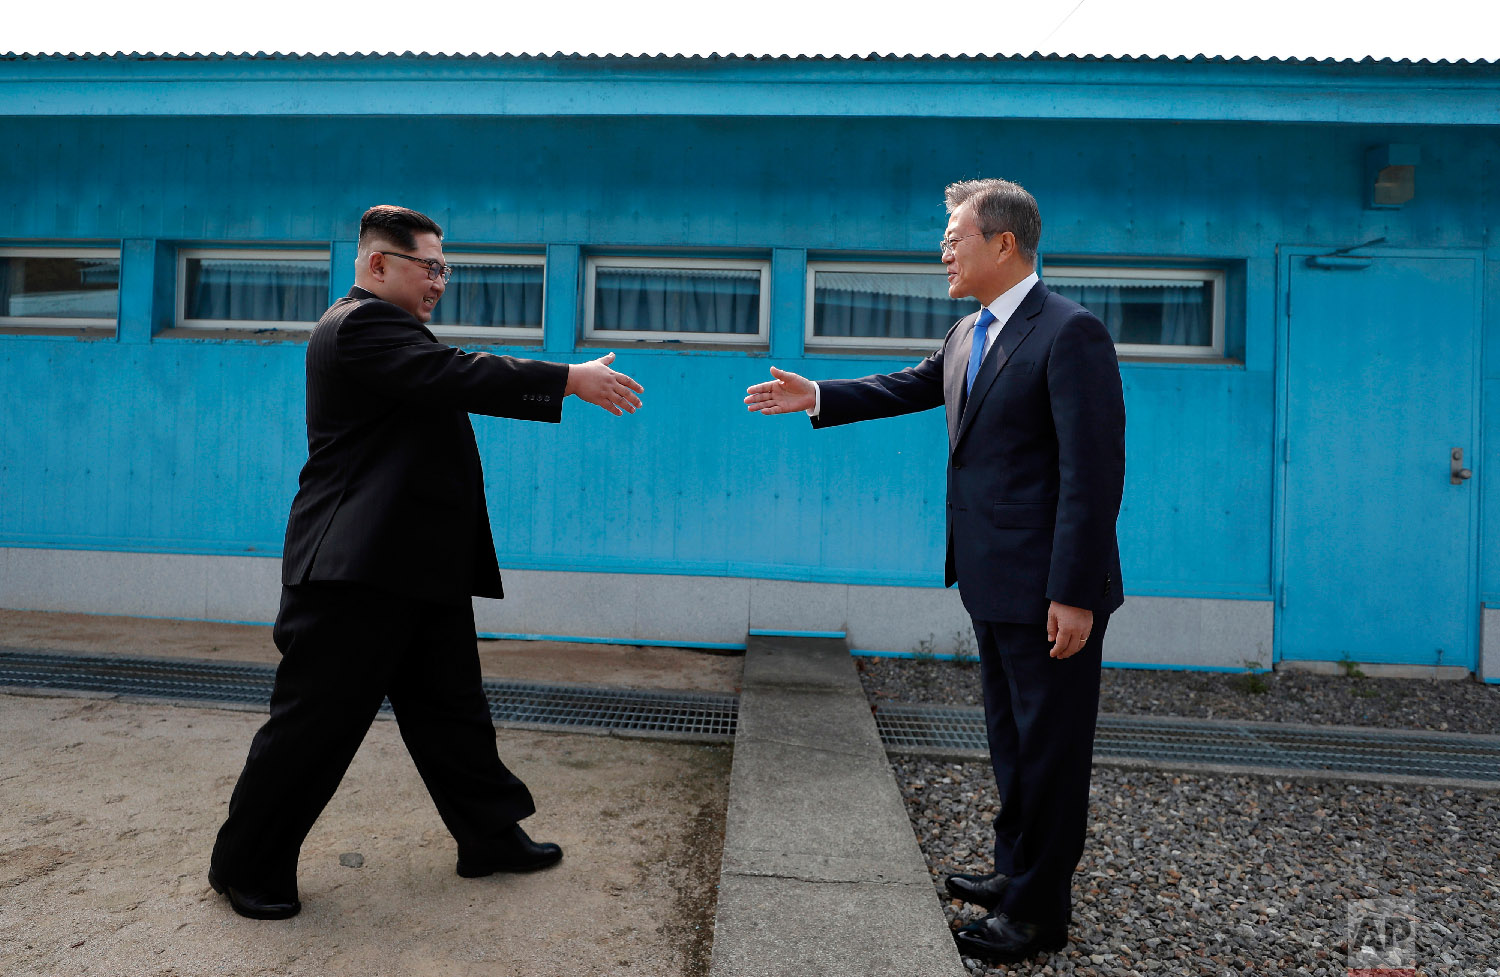  North Korean leader Kim Jong Un, left, prepares to shake hands with South Korean President Moon Jae-in over the military demarcation line at the border village of Panmunjom in Demilitarized Zone on April 27, 2018. (Korea Summit Press Pool via AP) 